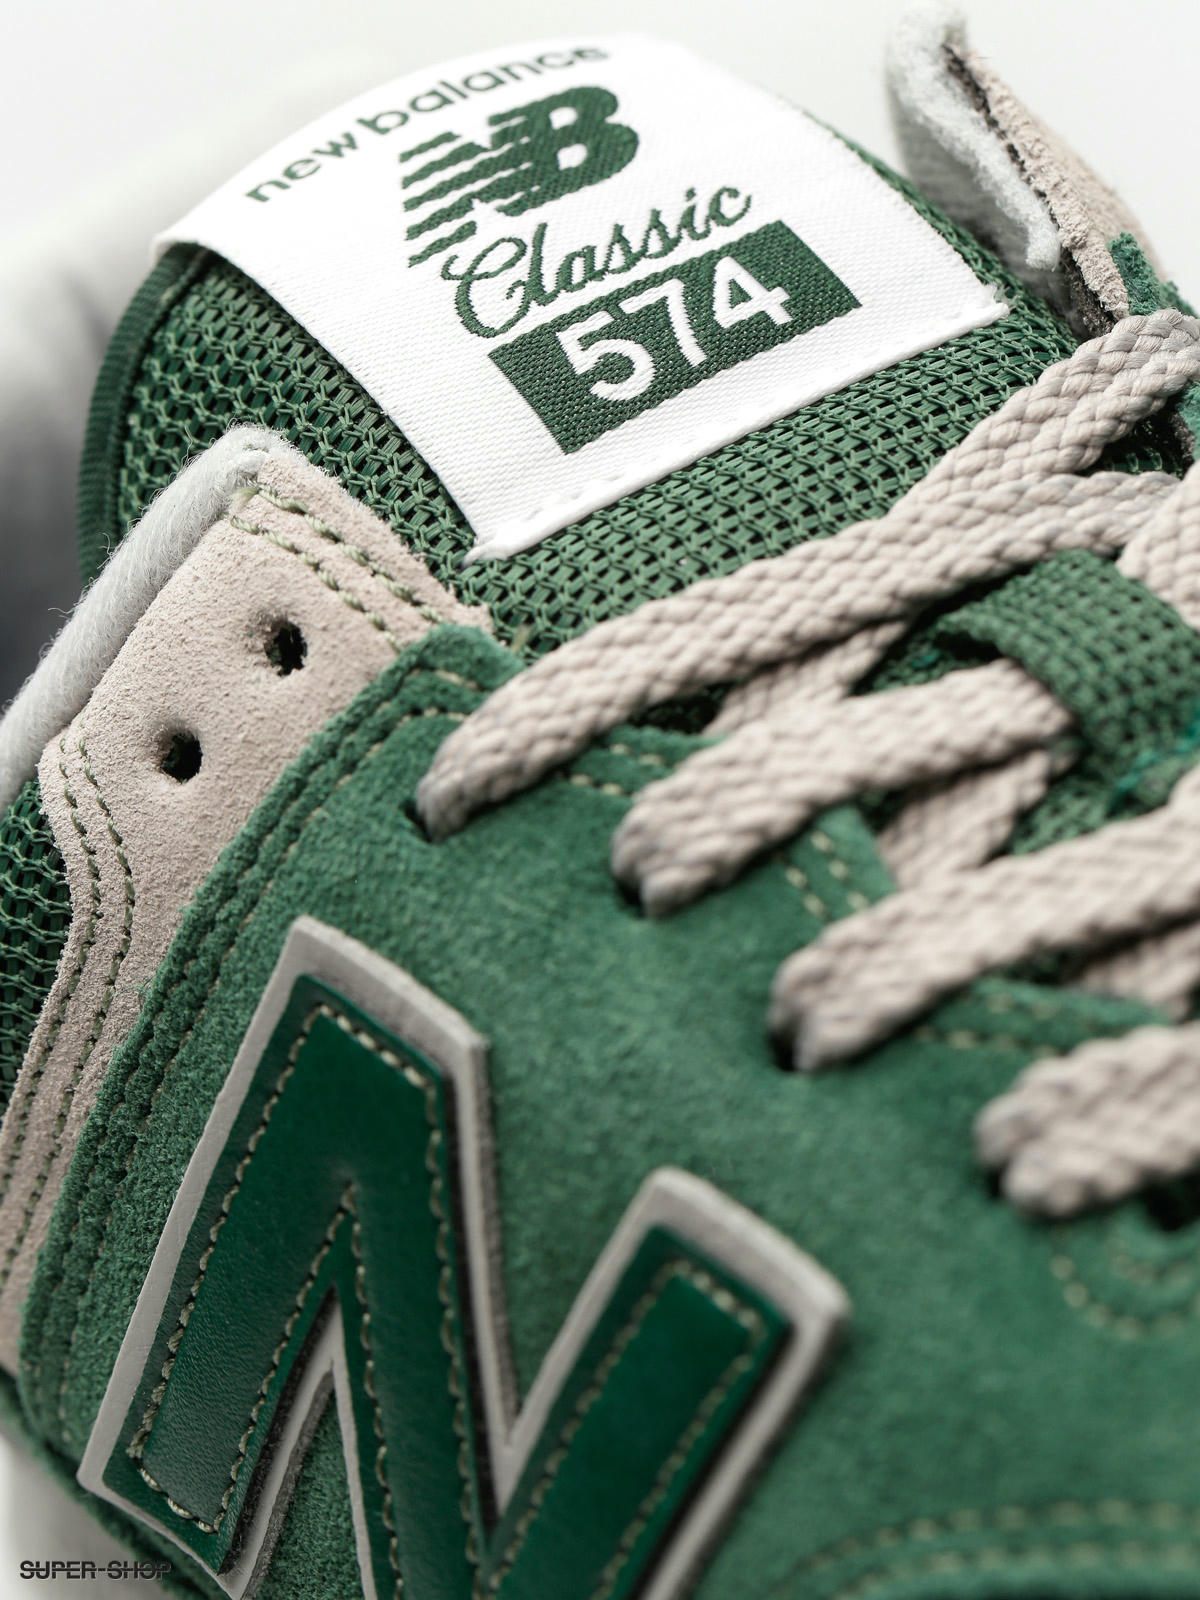 New Balance Shoes 574 (forest/green)